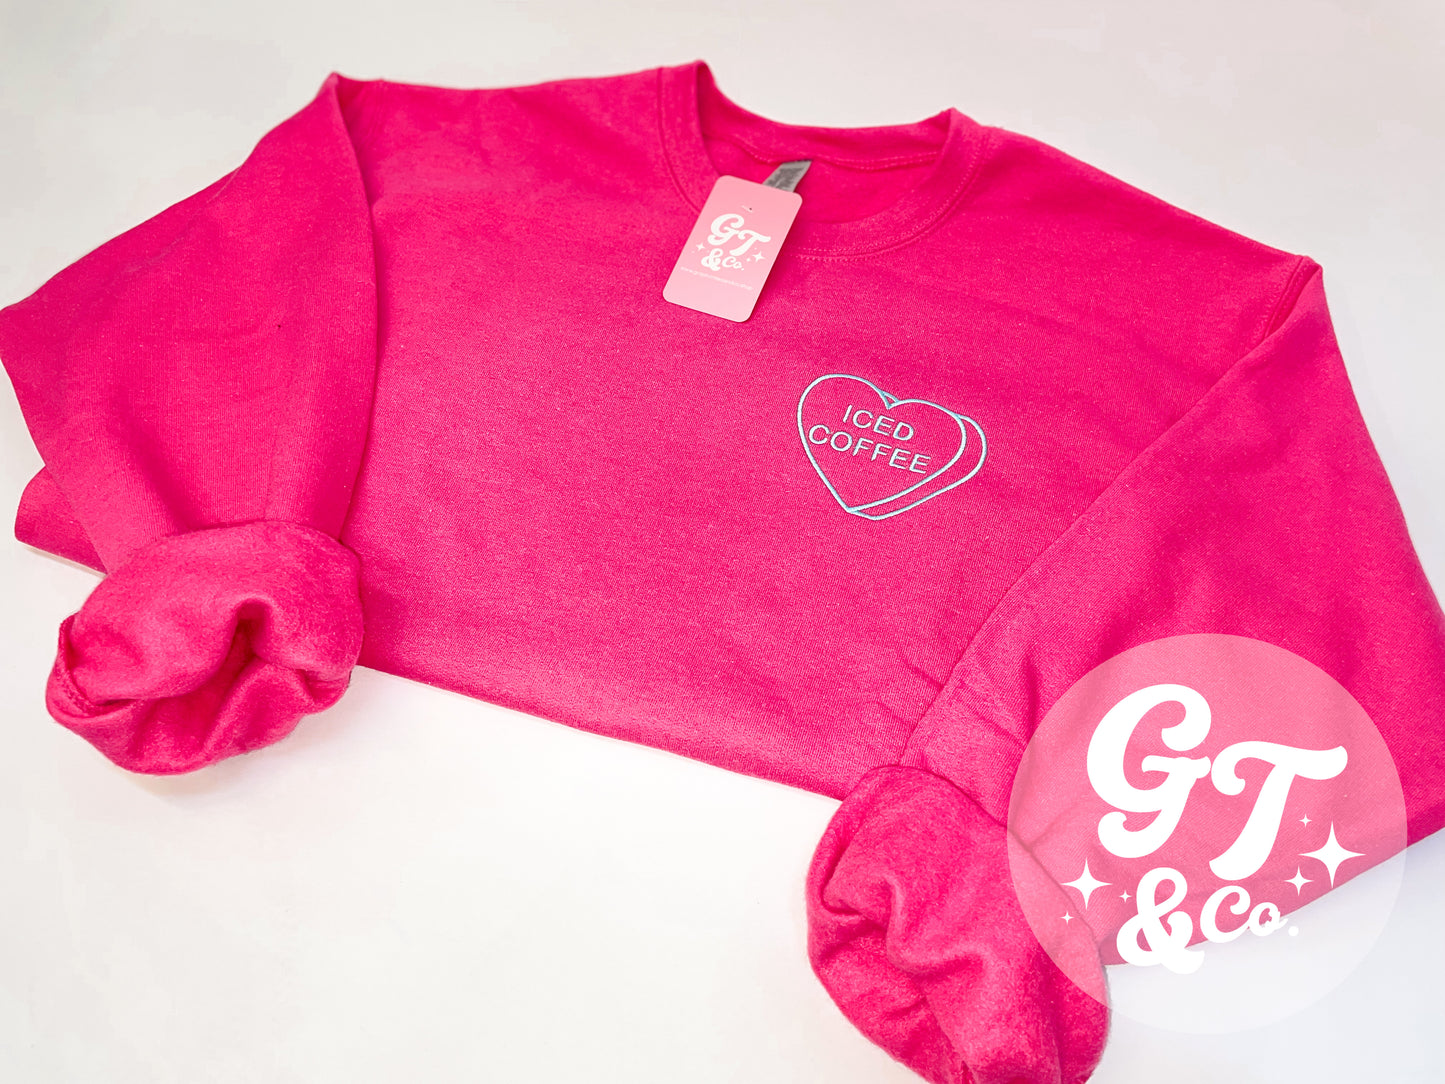 Iced Coffee Candy Heart Embroidered Crewneck